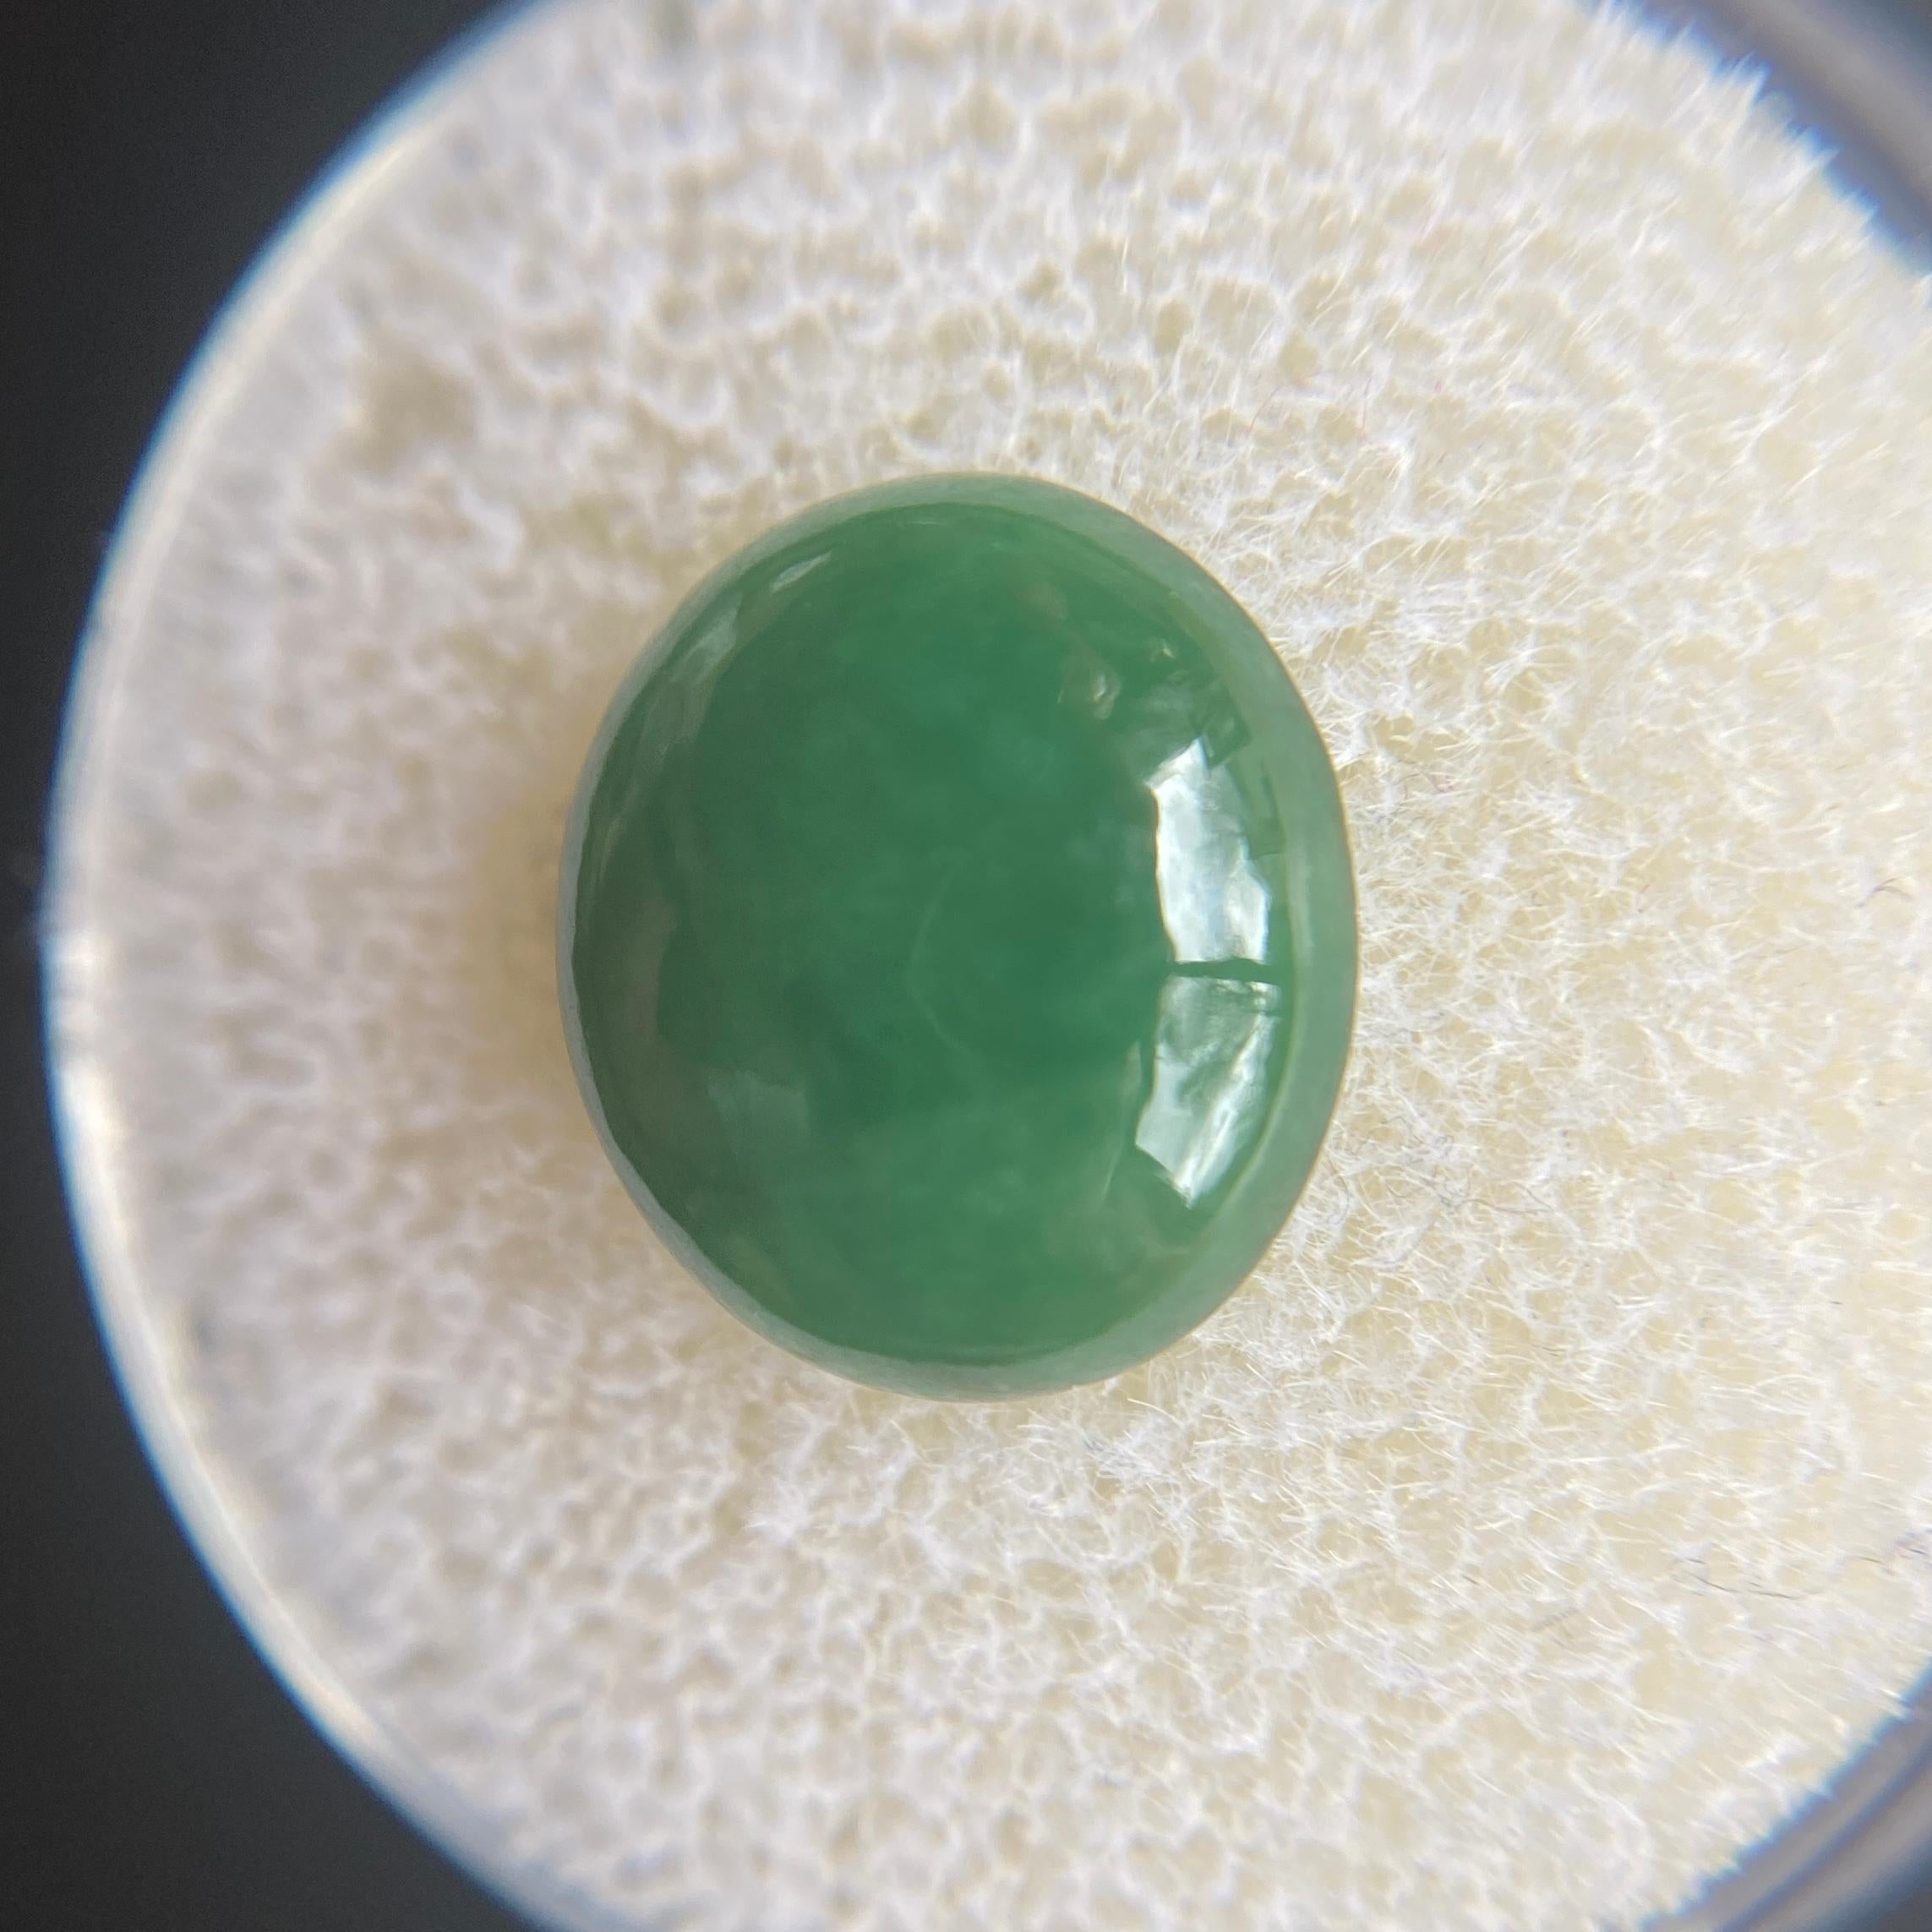 Natural A Grade Jadeite Gemstone.

4.51 Carat with an excellent oval cabochon cut. Fully certified by AIG.

Totally untreated Jadeite jade, referred to as ‘A’ grade in the trade. Mined in Burma, source of the finest jade.

No nicks or scratches on